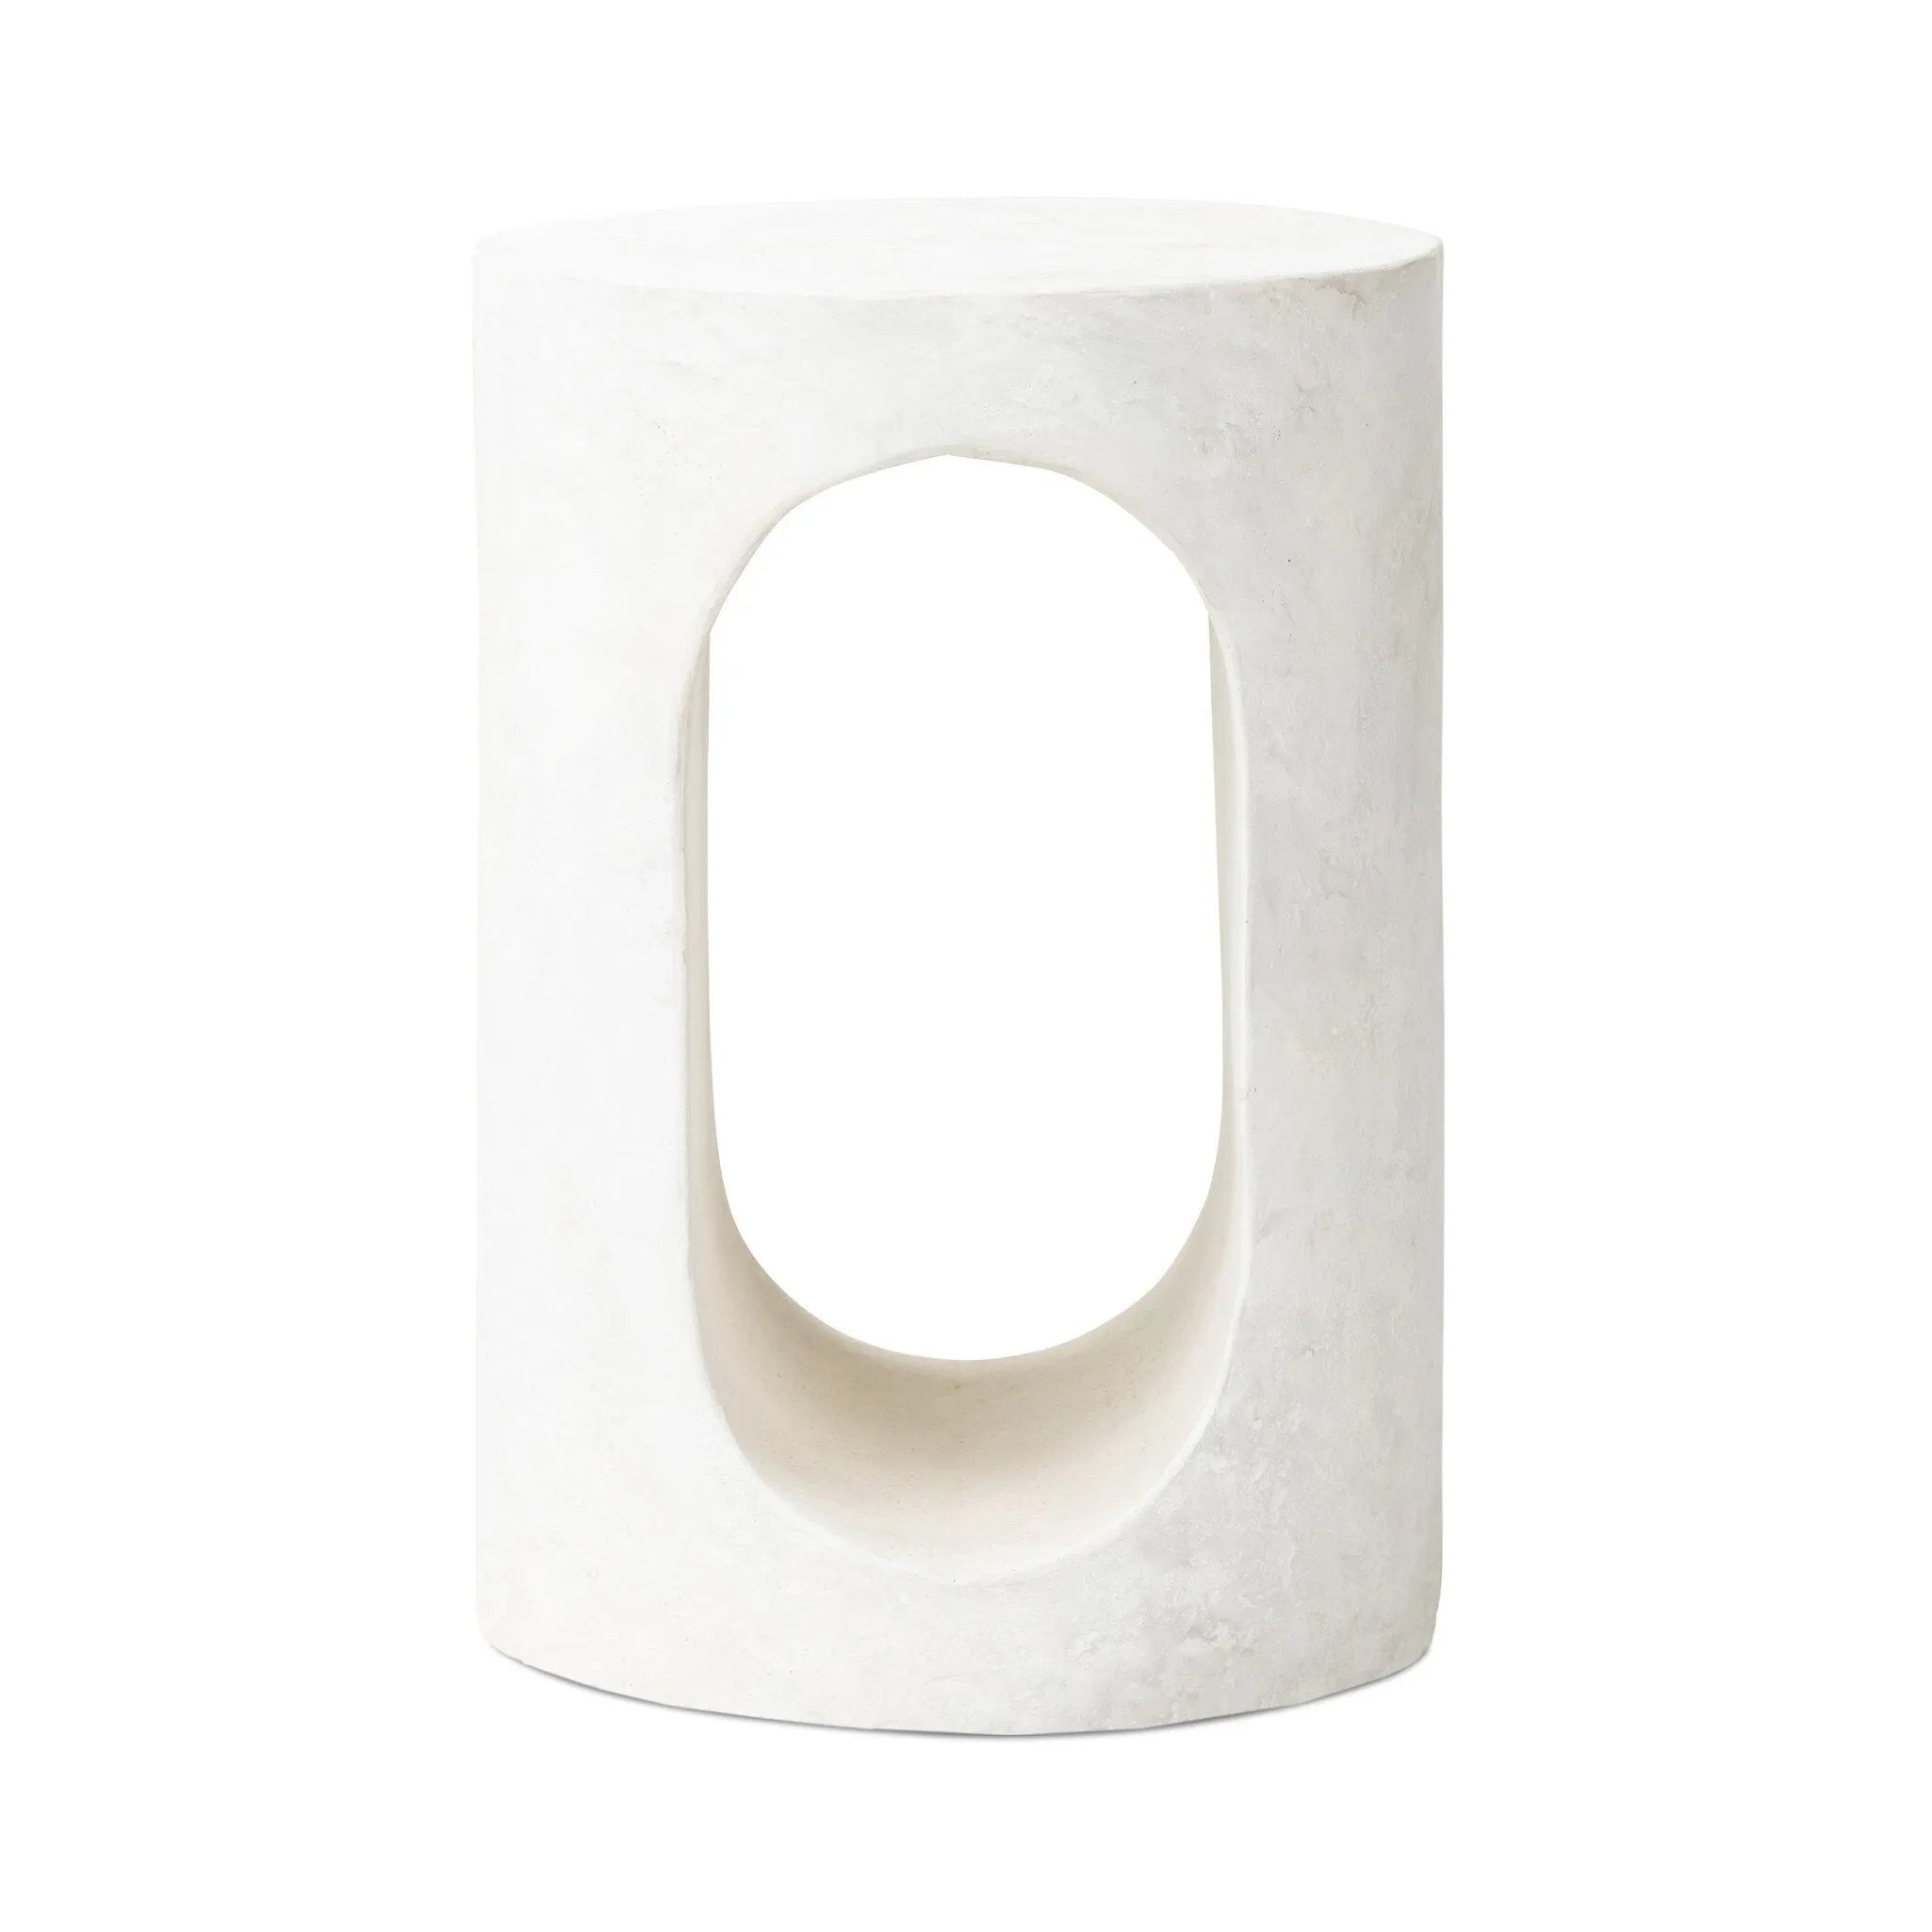 Made from textured white concrete, a cylinder shaped end table features a pill-shaped cutout for a light look. Subtle mottling adds a hint of texture.Collection: Chandle Amethyst Home provides interior design, new home construction design consulting, vintage area rugs, and lighting in the Washington metro area.